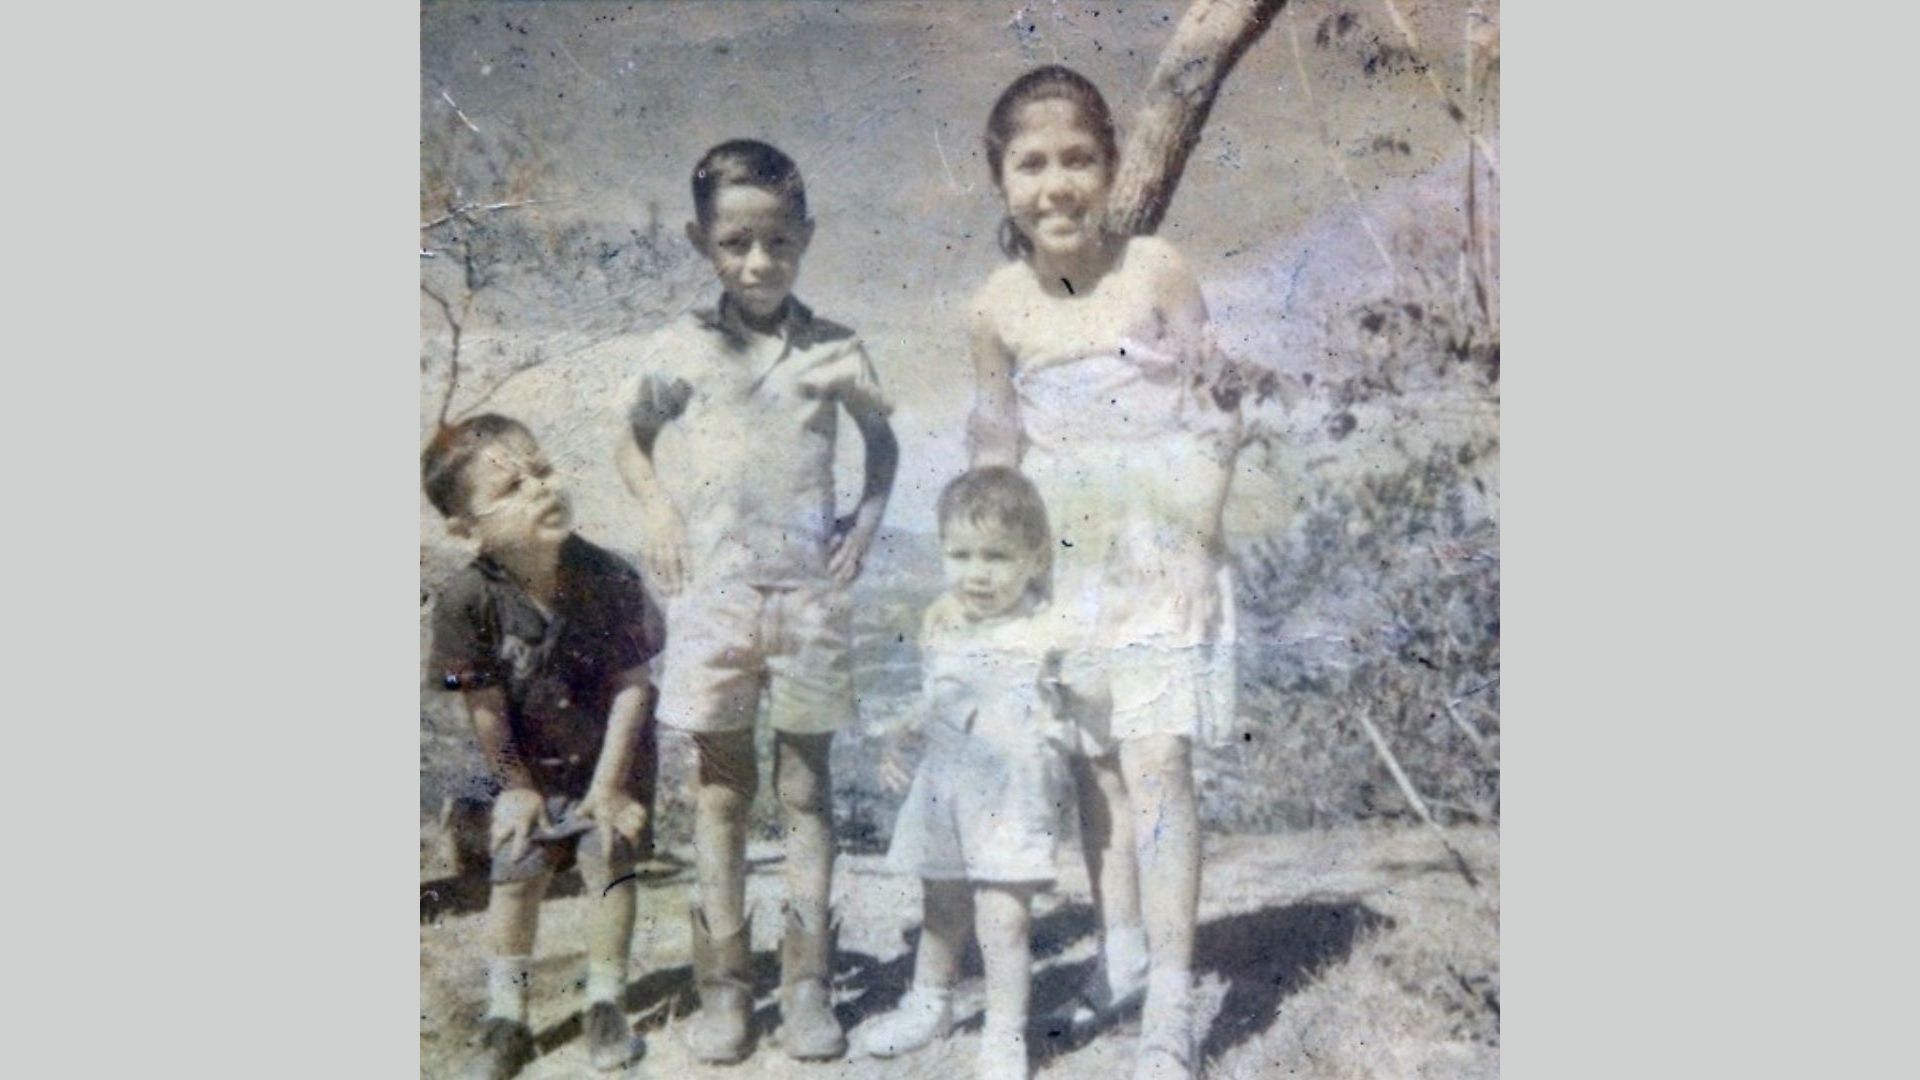 A grainy image of children, wearing summer clothes, standing in front of tree branches